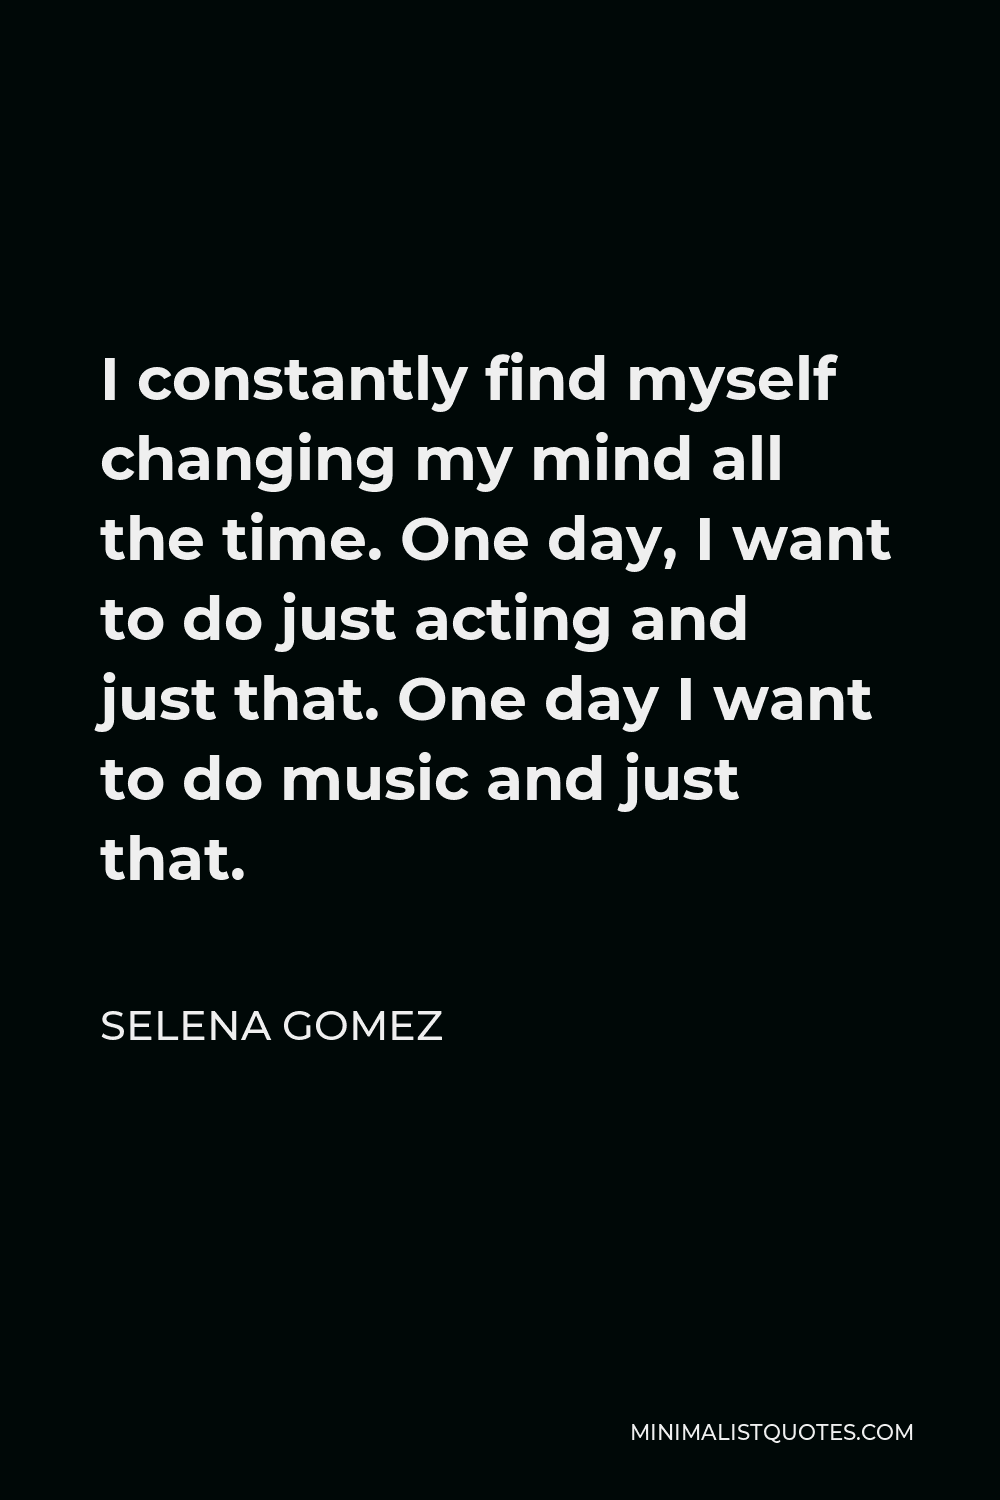 Selena Gomez Quote - I constantly find myself changing my mind all the time. One day, I want to do just acting and just that. One day I want to do music and just that.